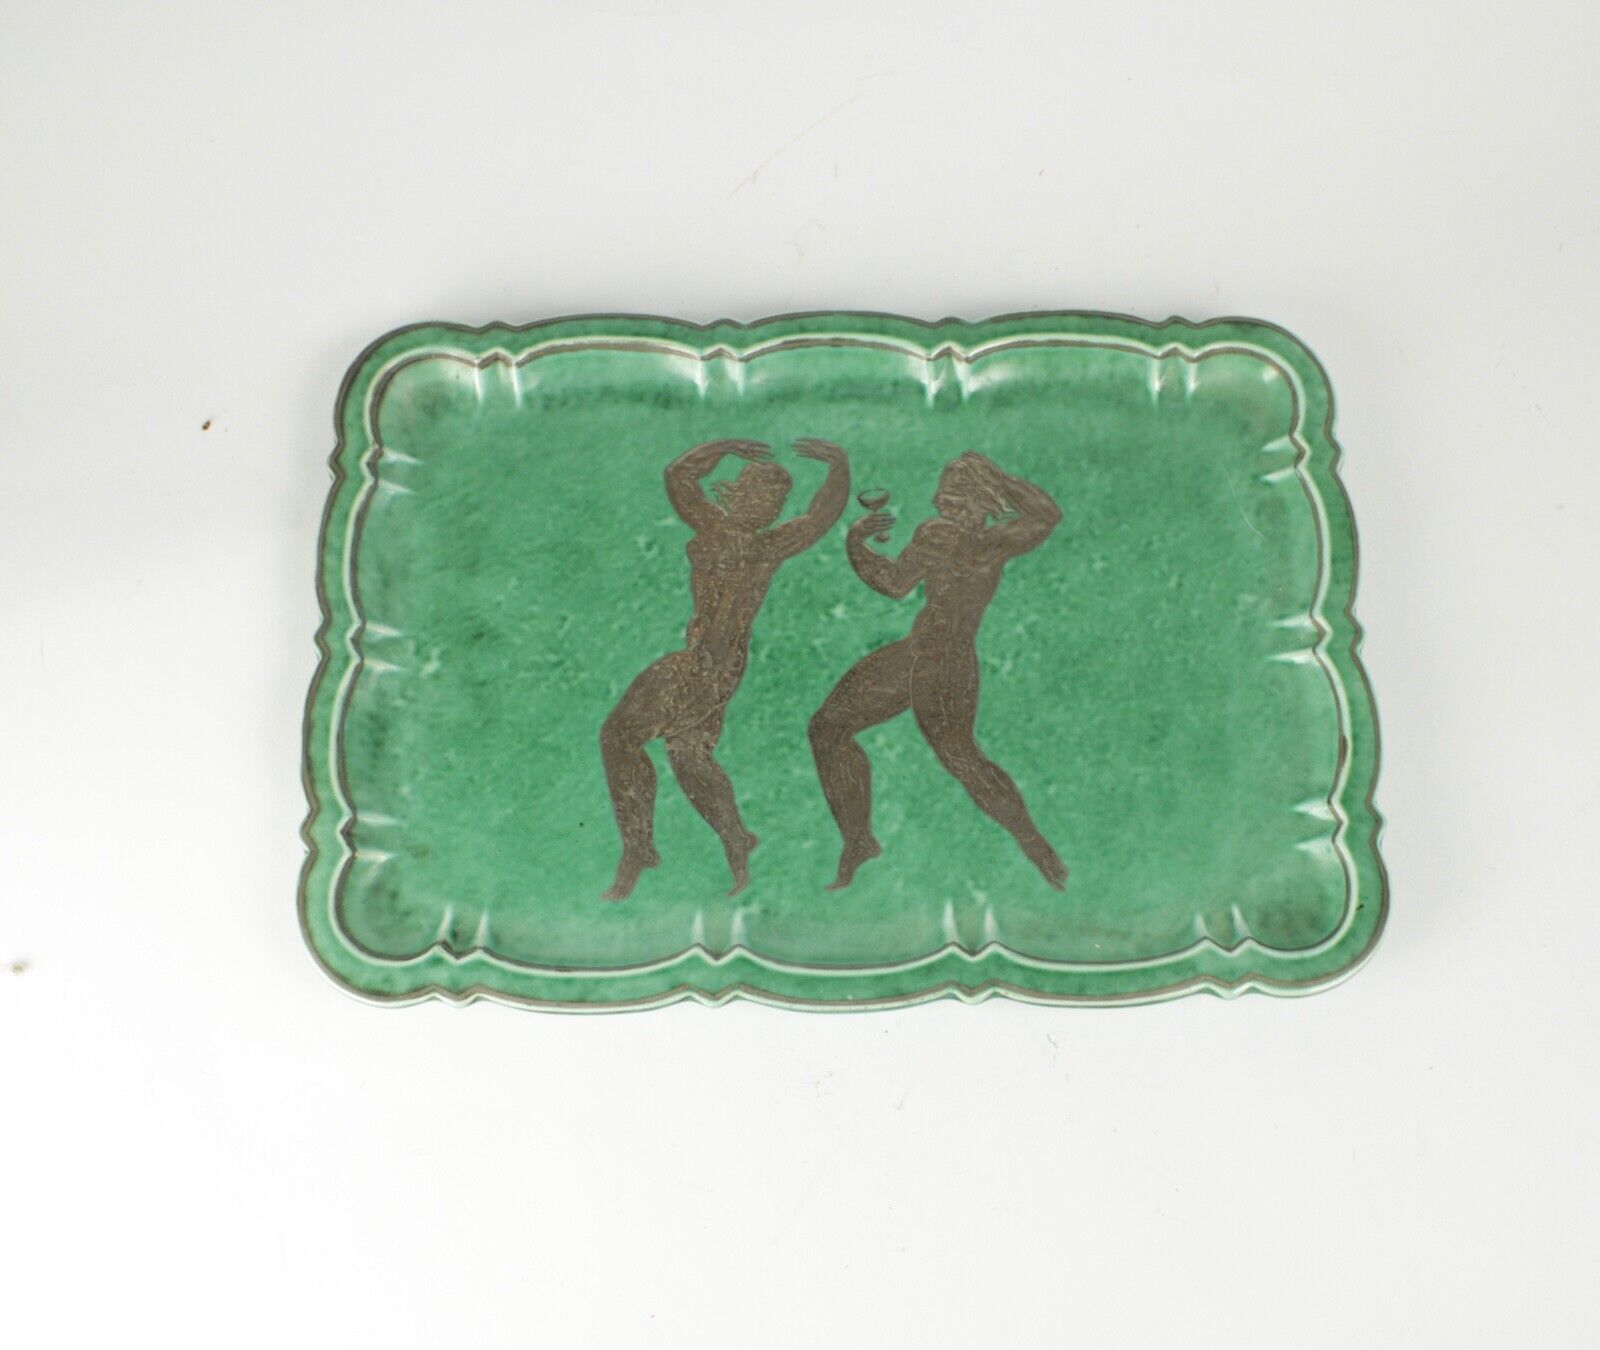 Argenta tray for Gustavsberg with Art Deco decoration in silver by Wilhelm Kåge